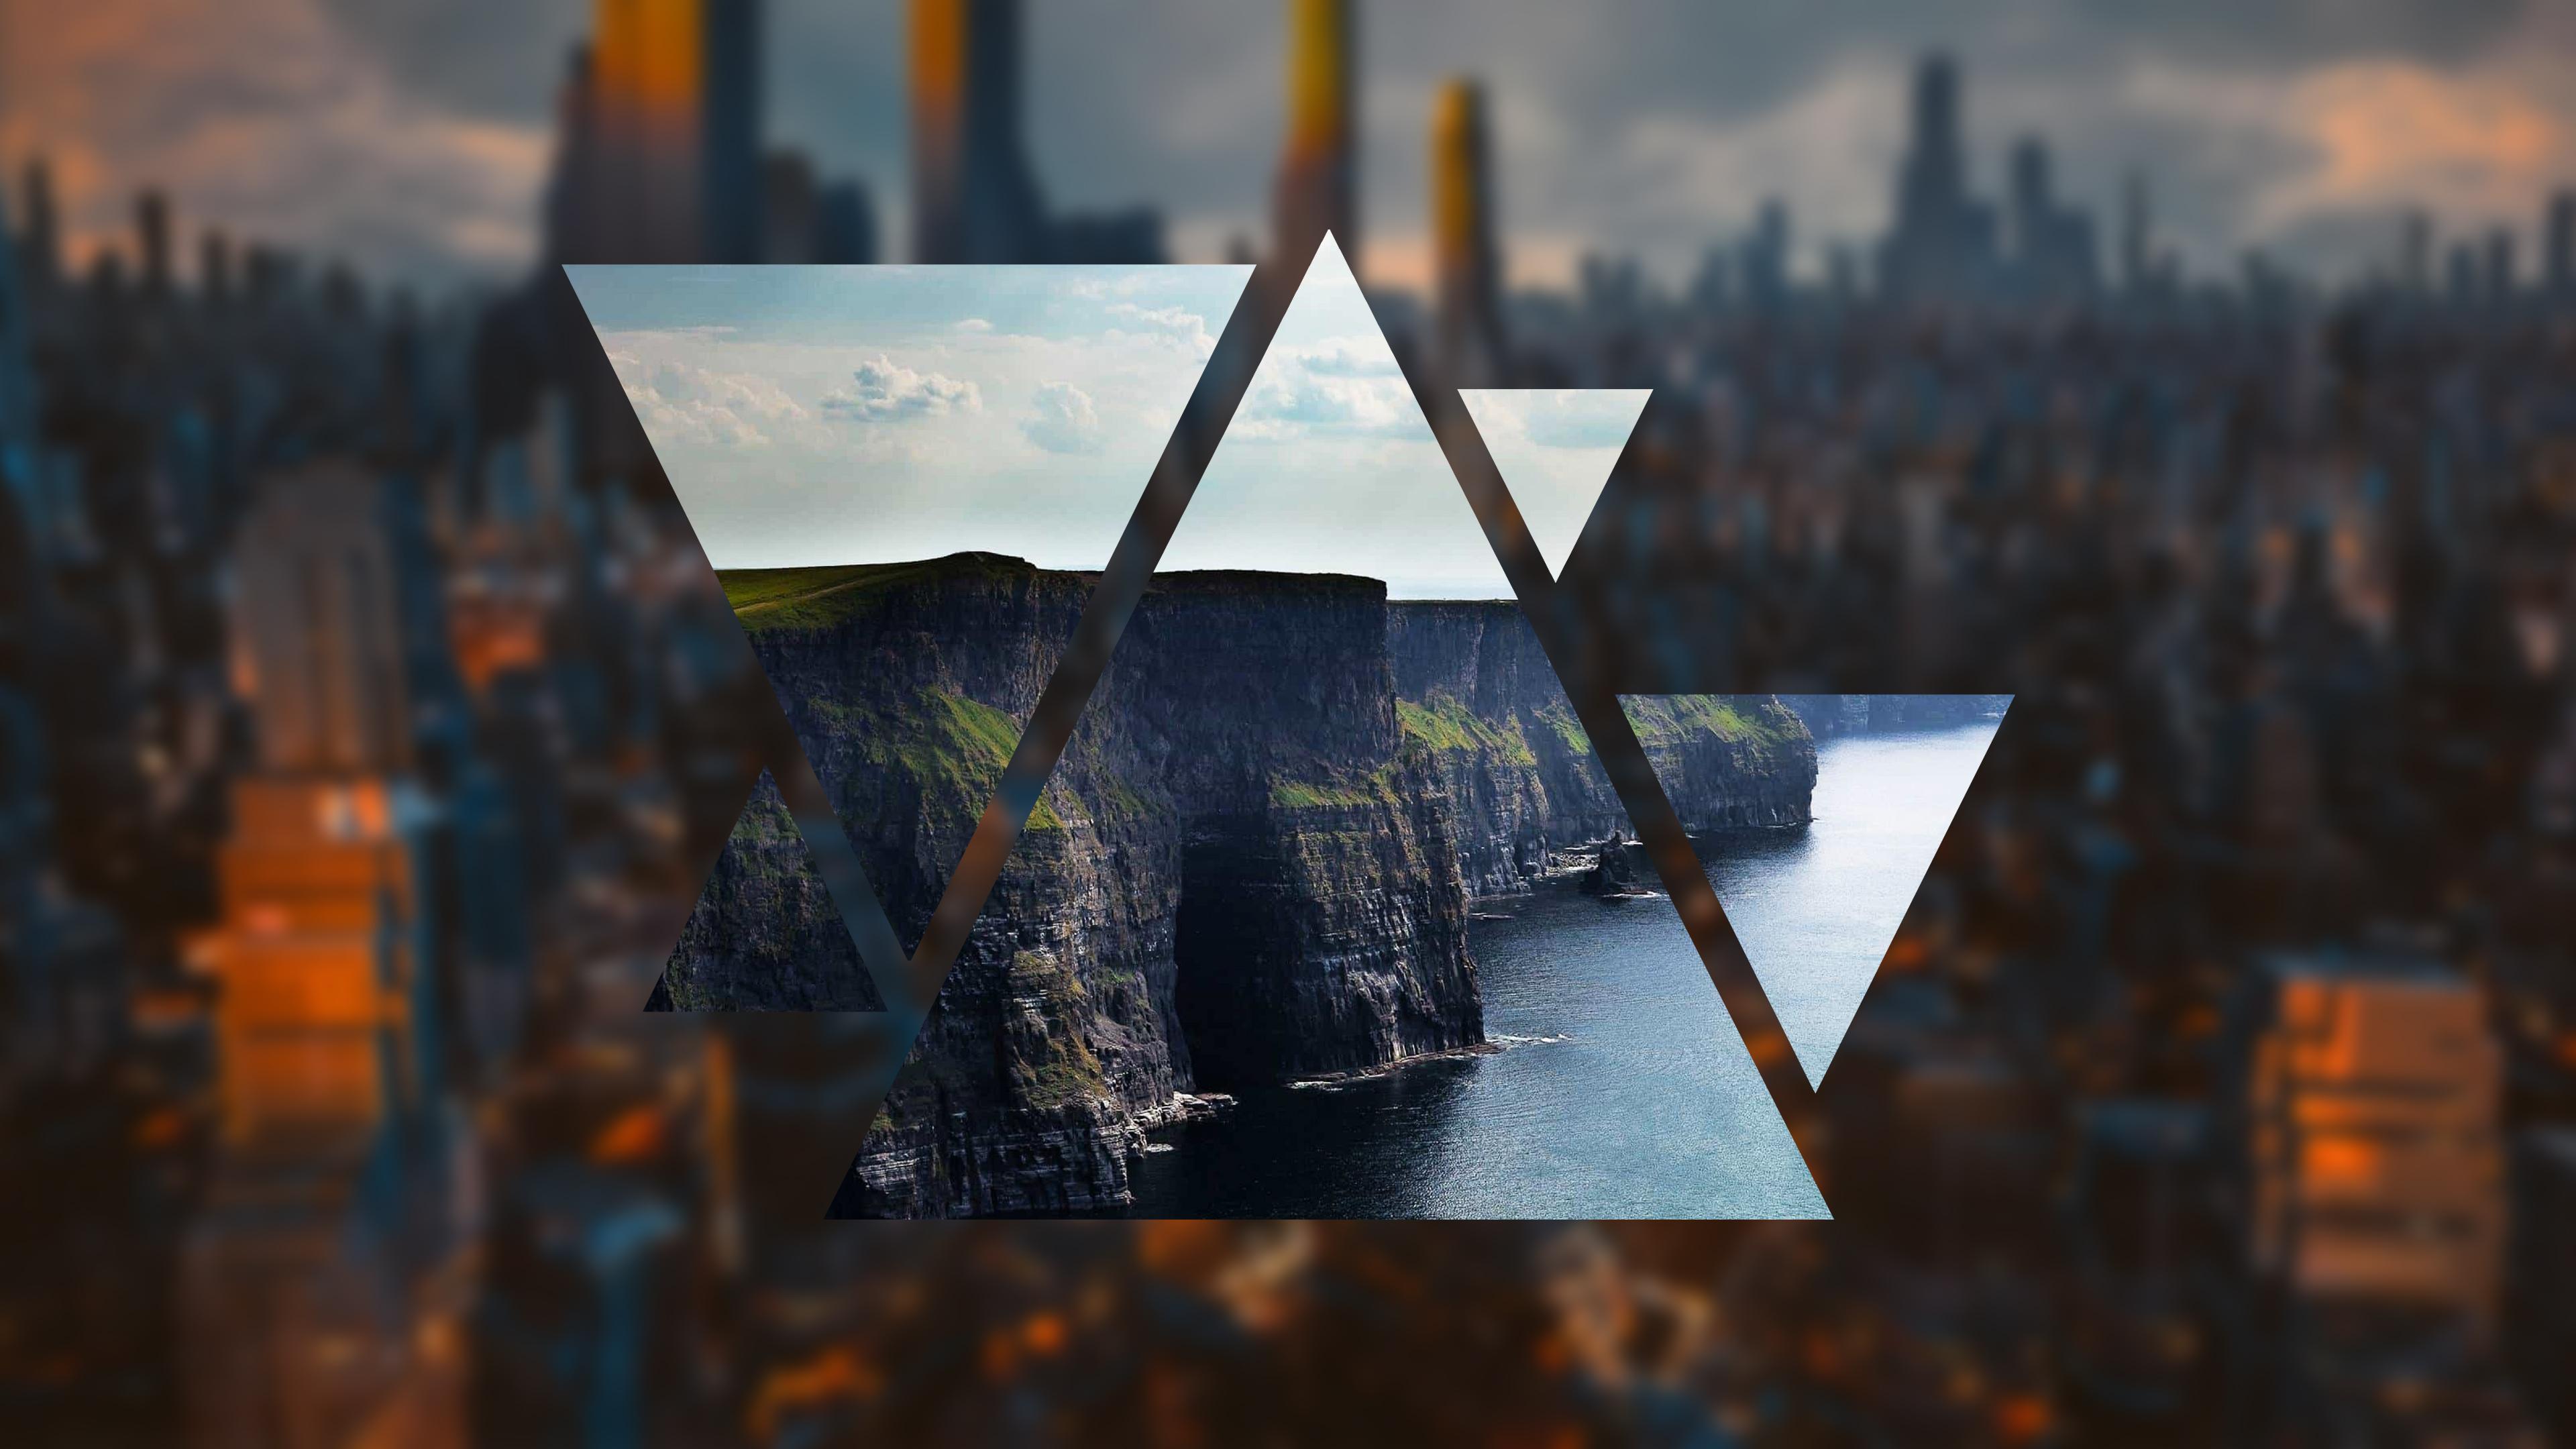 Blurry City / Cliffs [4K] [X-Post / r / wallpapers]: poliscapes